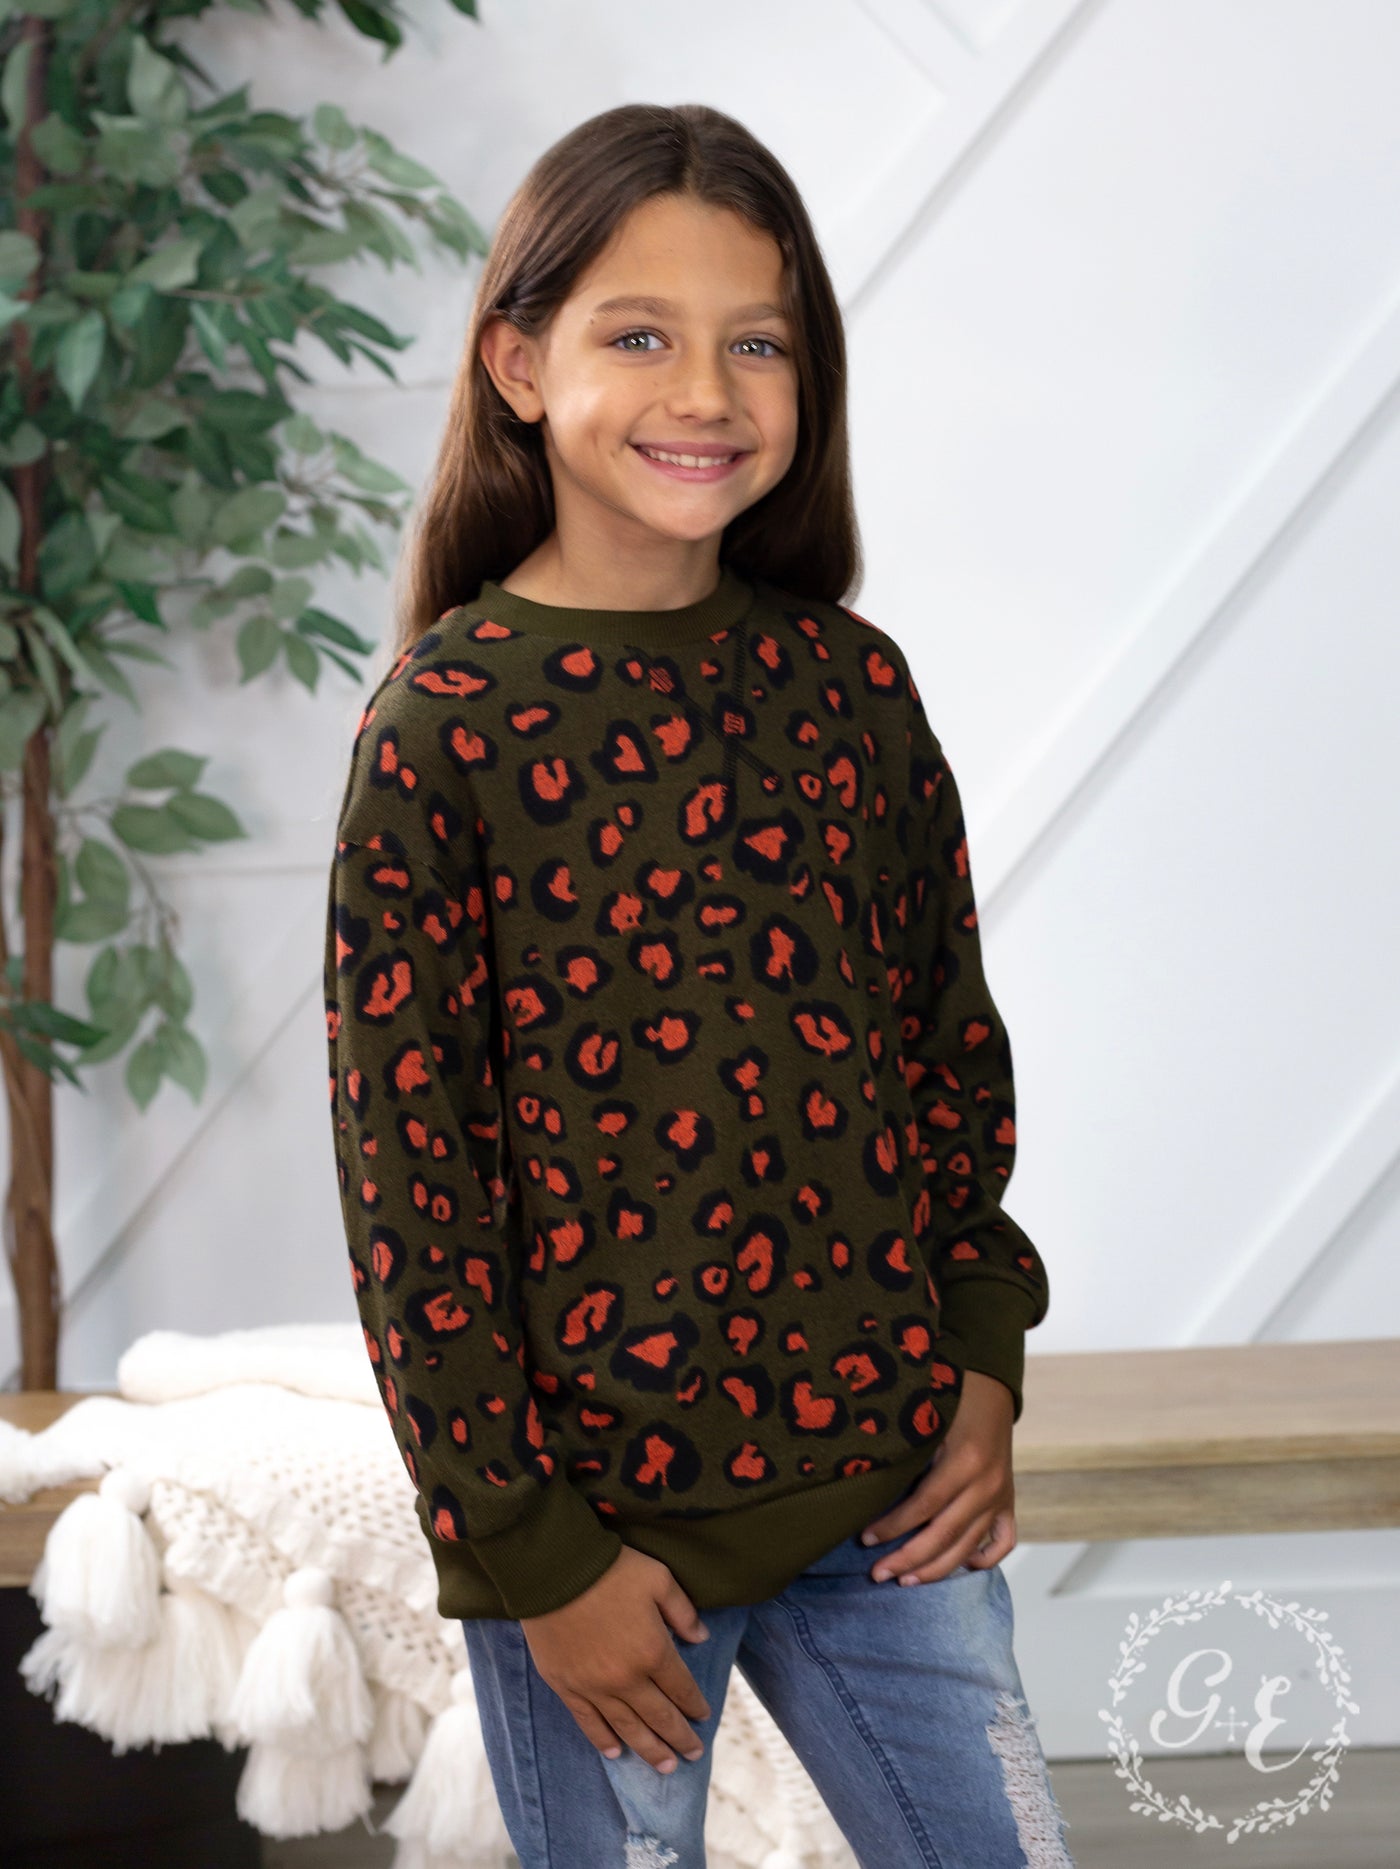 Girls Rawr Like a Leopard Long Sleeve Round Neck Sweater with Knit Wrist, Green